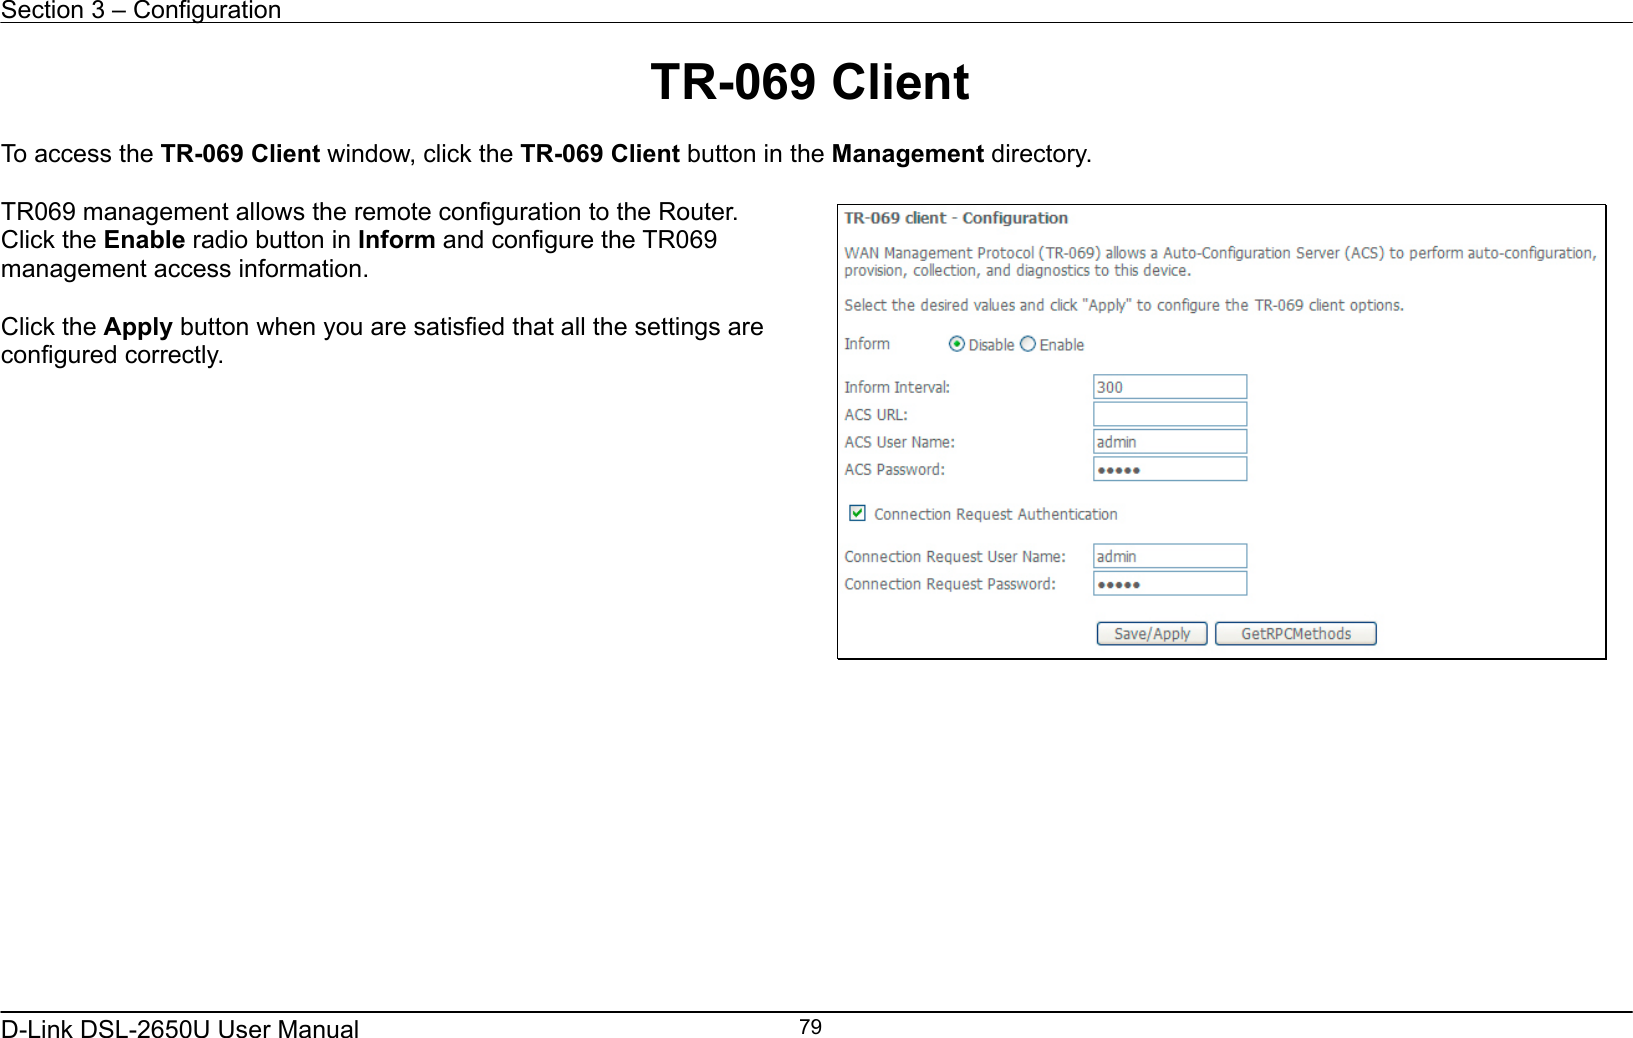 Section 3 – Configuration   D-Link DSL-2650U User Manual    79TR-069 Client  To access the TR-069 Client window, click the TR-069 Client button in the Management directory.  TR069 management allows the remote configuration to the Router. Click the Enable radio button in Inform and configure the TR069 management access information.  Click the Apply button when you are satisfied that all the settings are configured correctly.                  